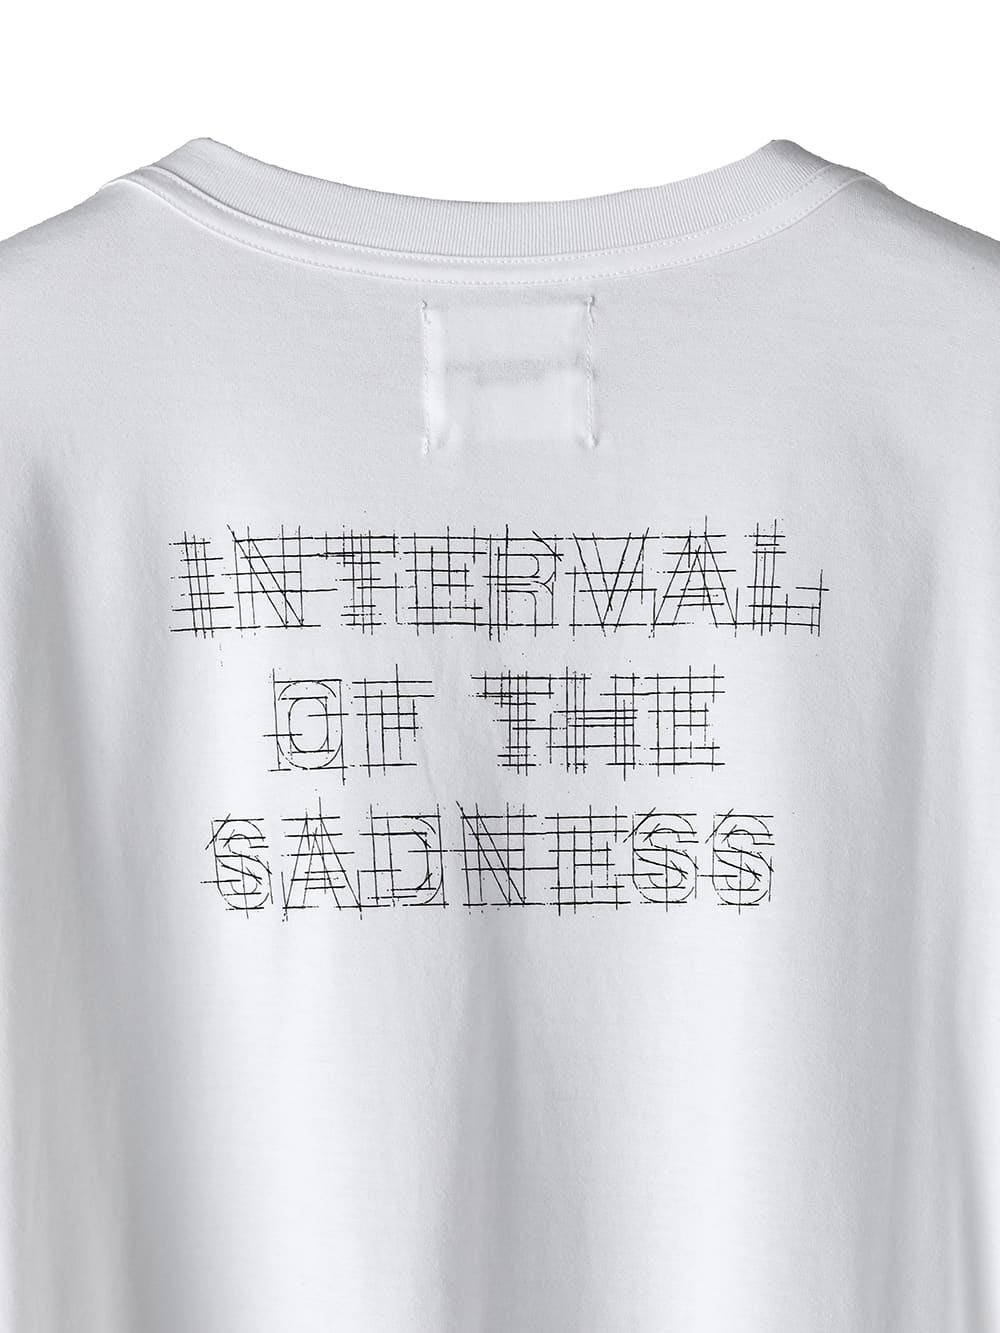 Interval of the sadness. (oversized l/s pocket tee)